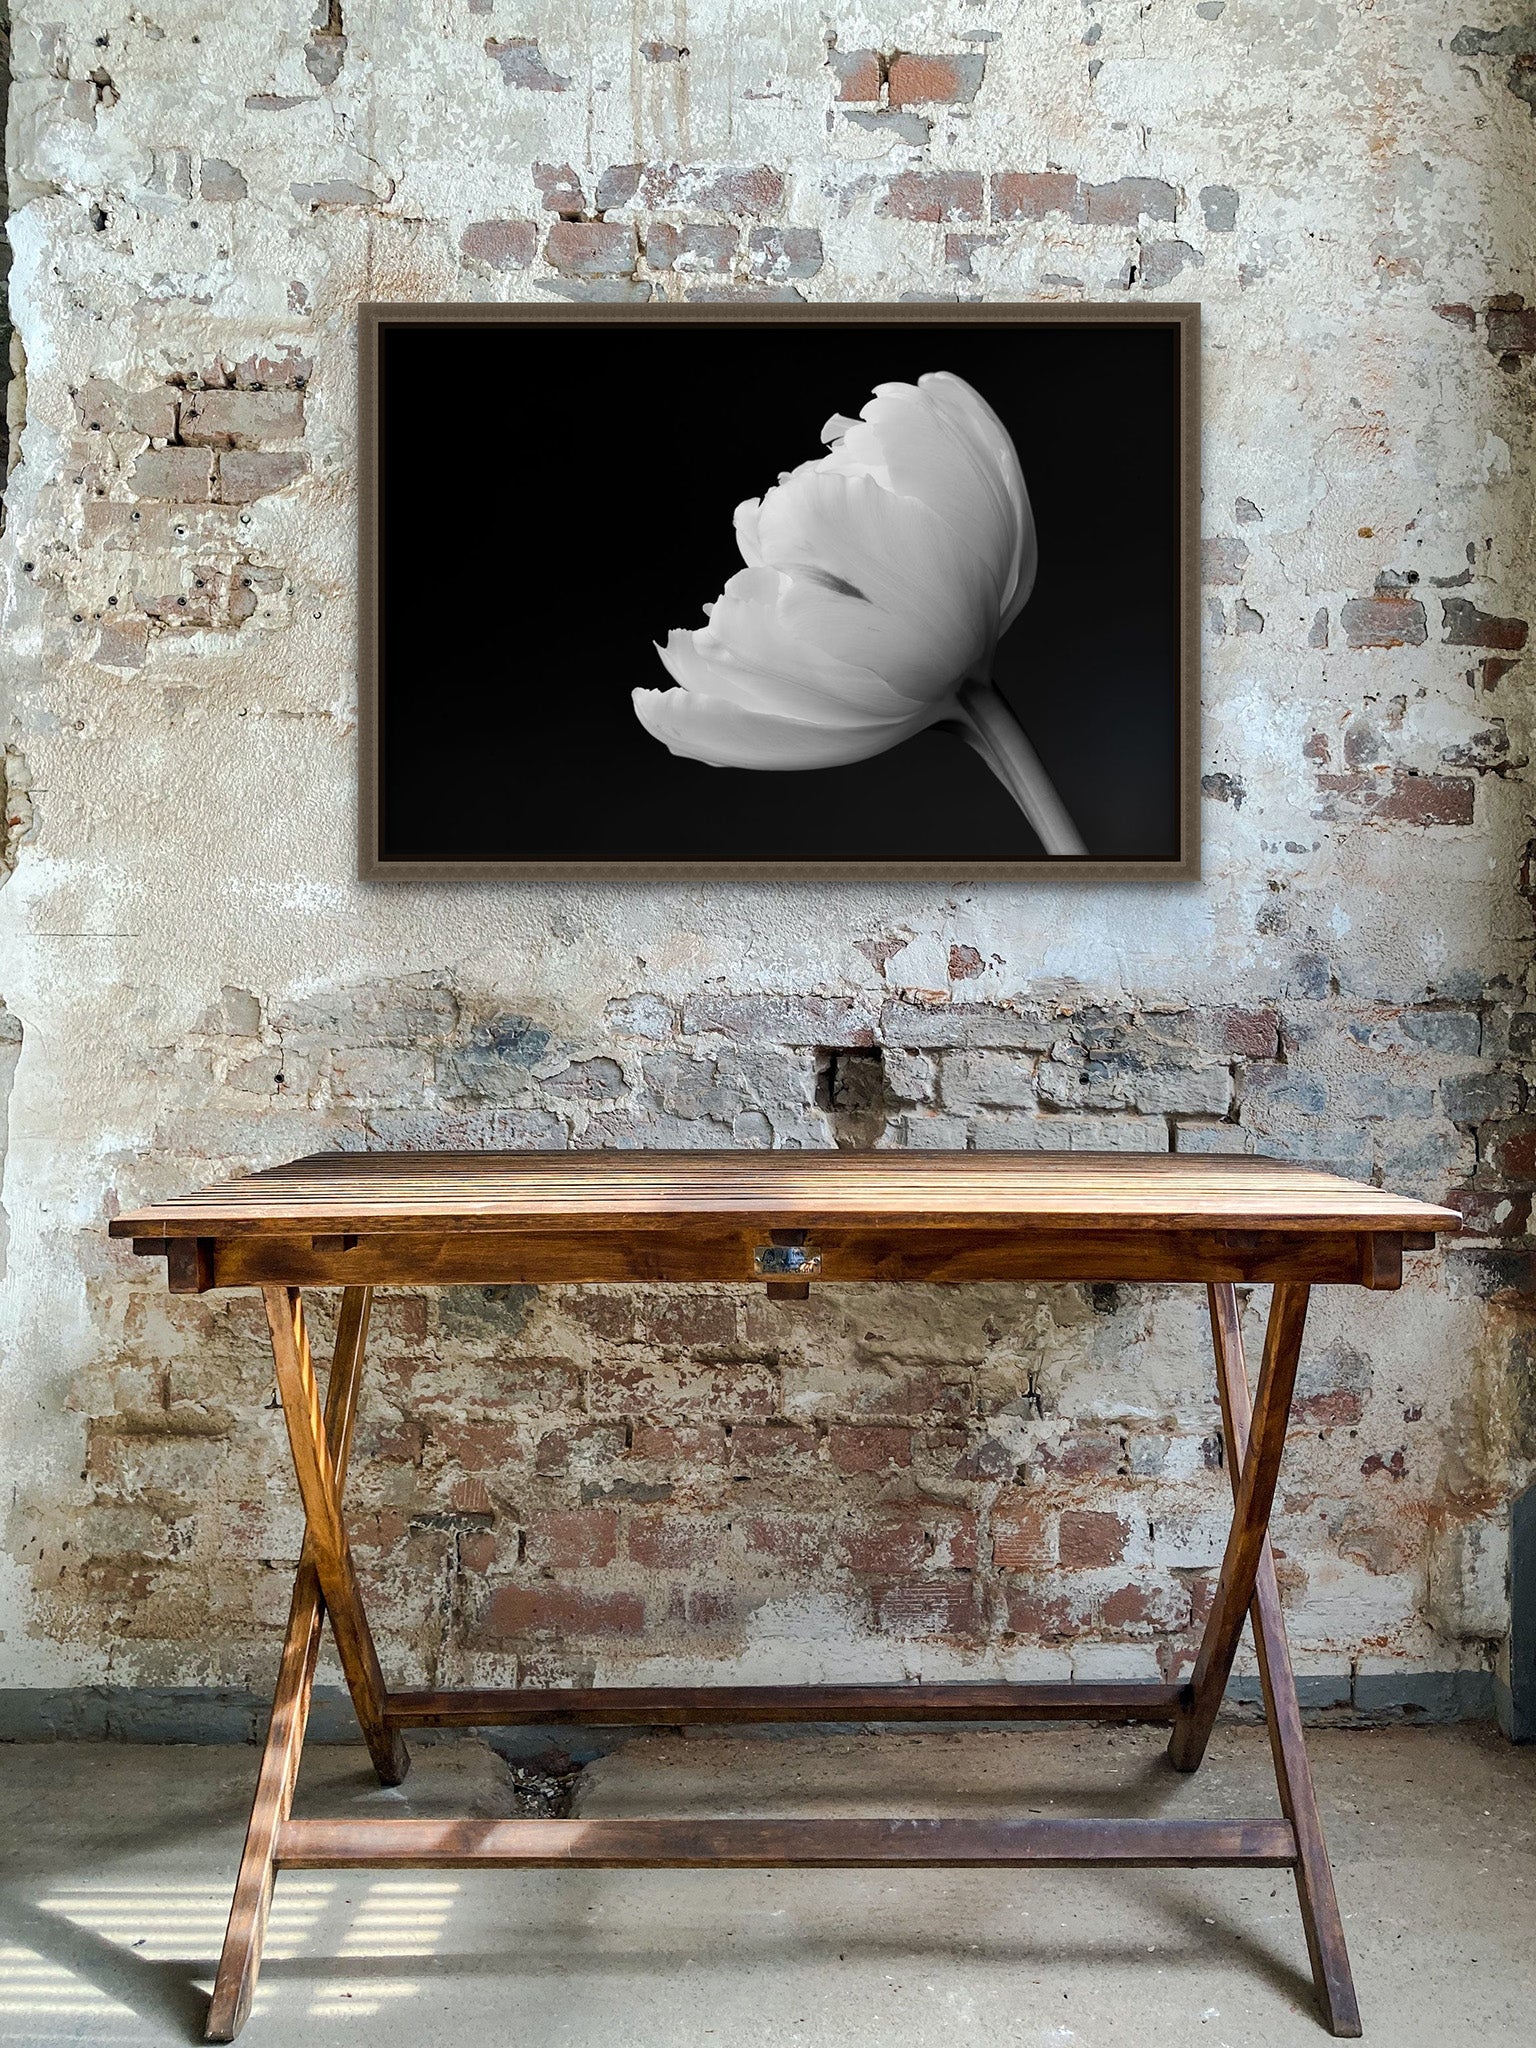 Photograph by Cameron Dreaux of a White parrot tulip on black background, hanging of the wall with a natural barnwood float frame around it. The wall is old brick and there is an empty table in the center of the frame. 